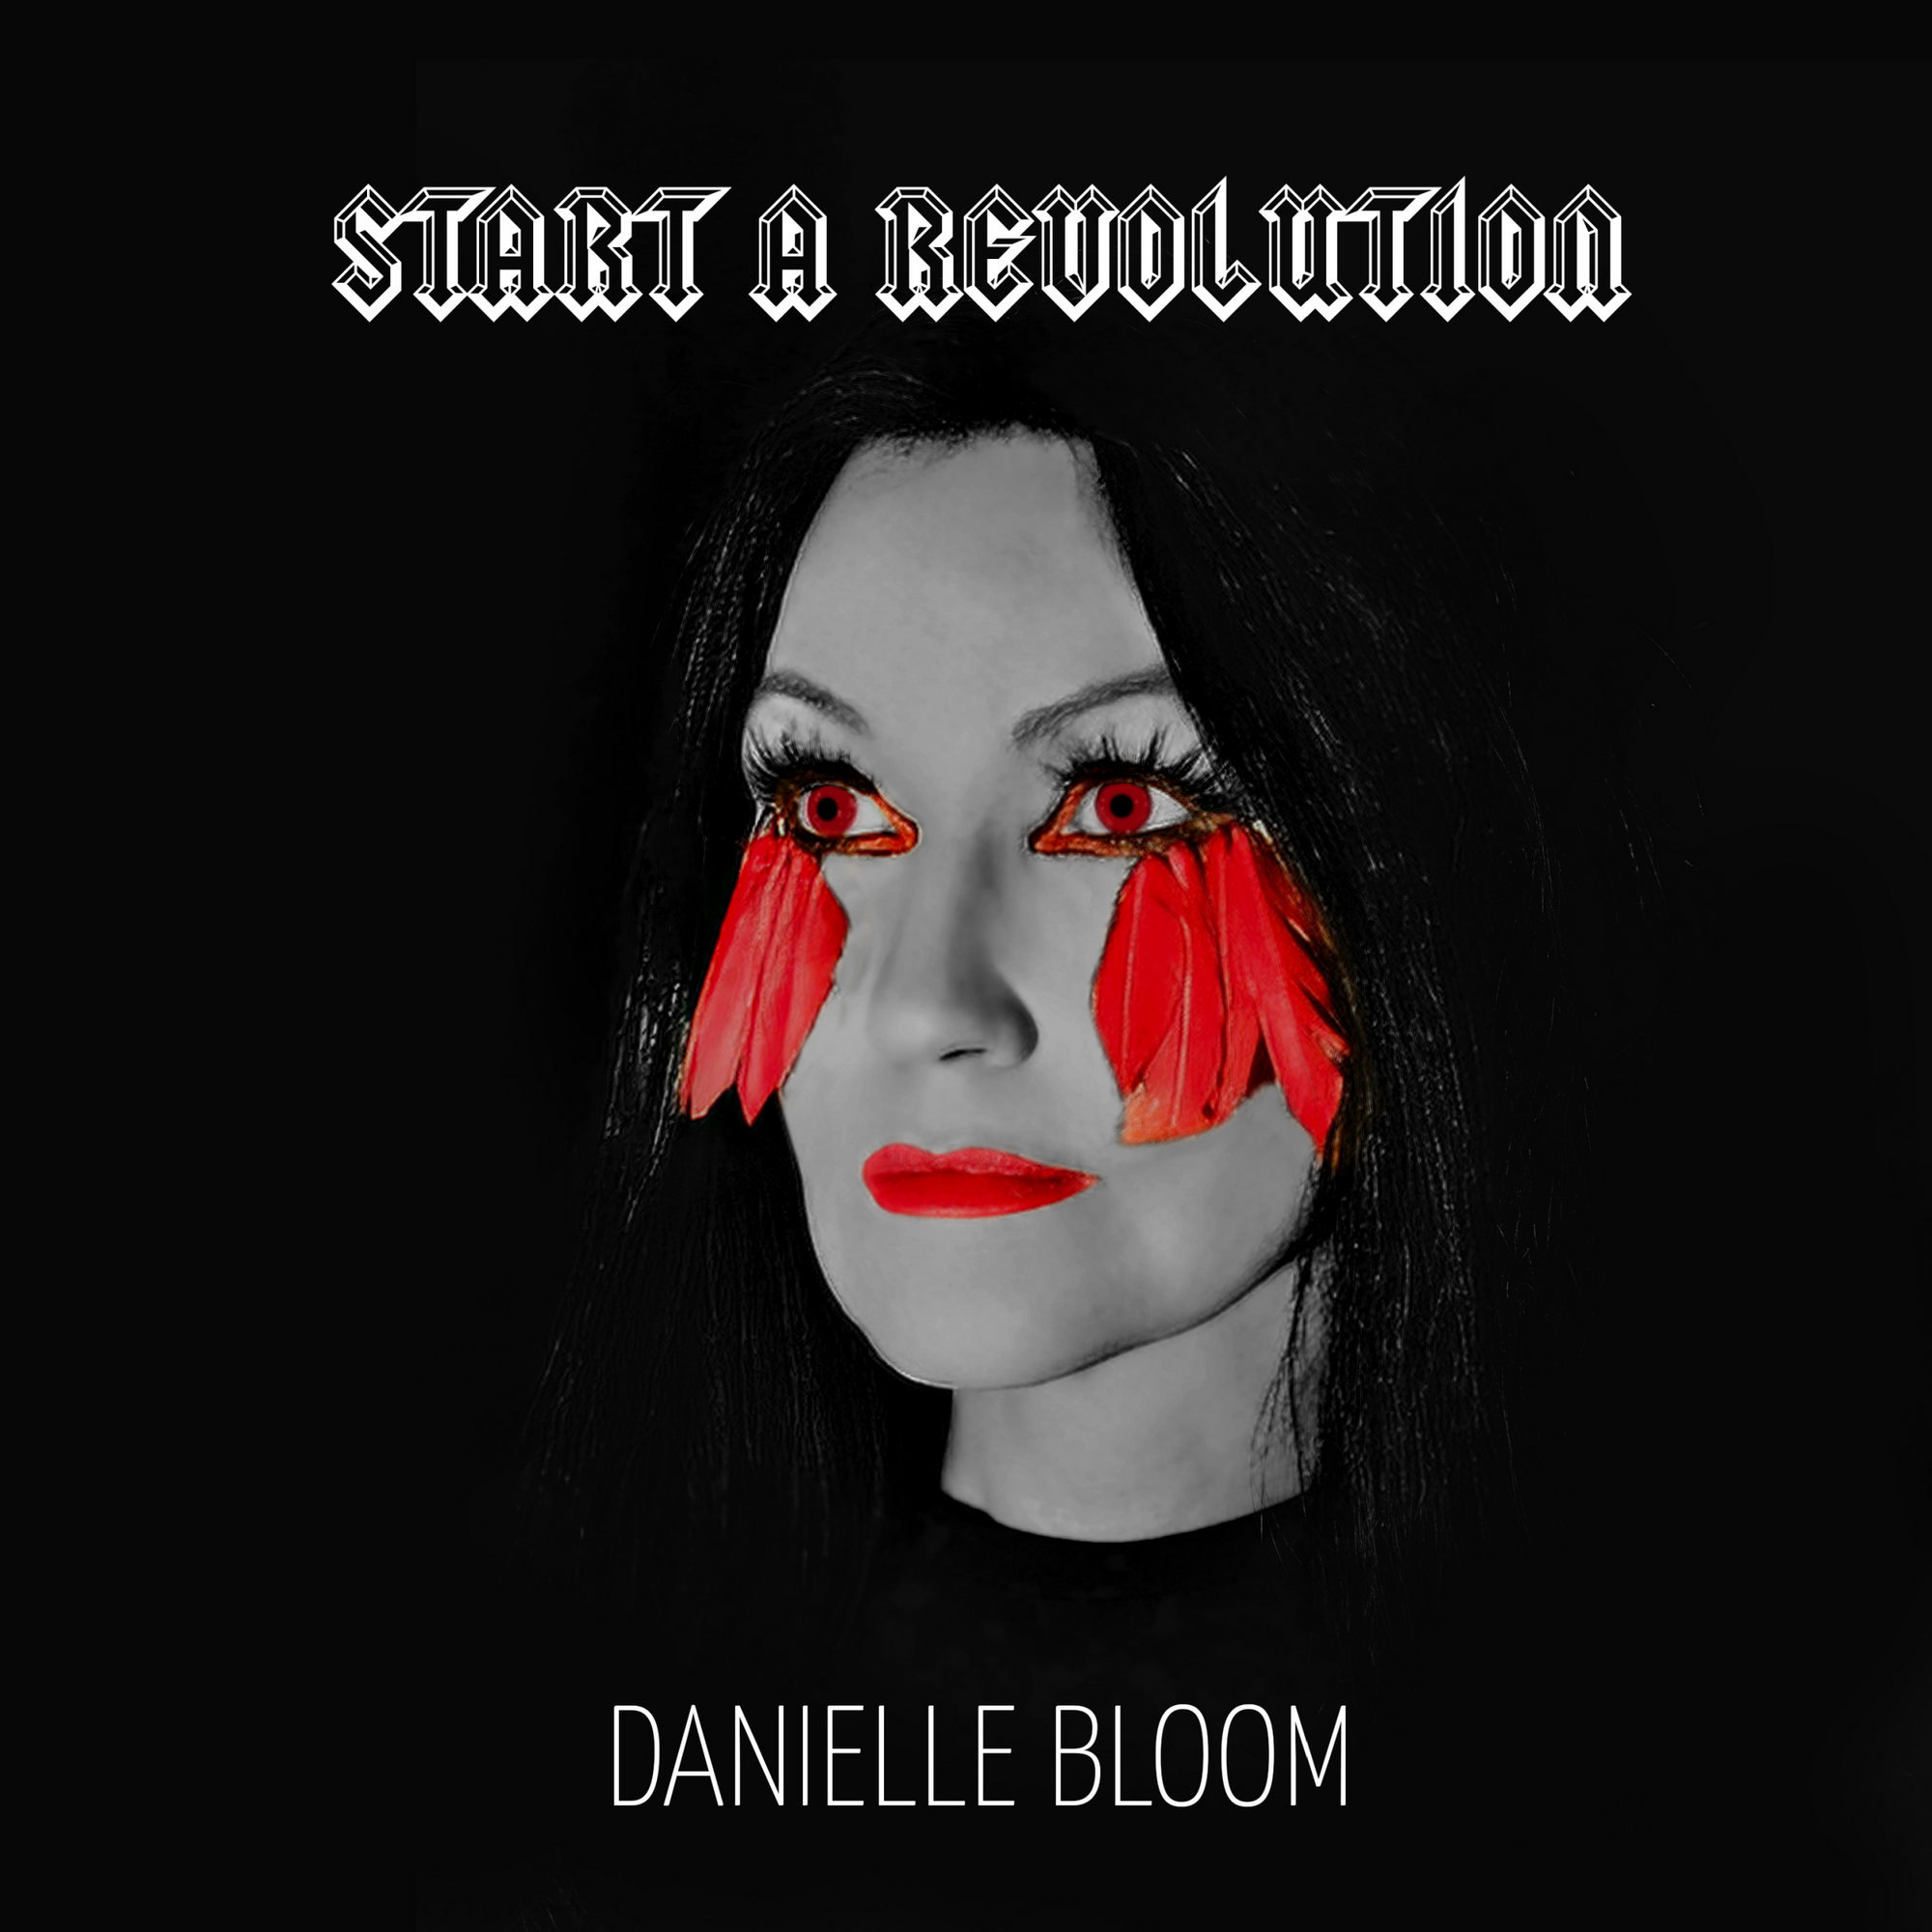 An Interview with Danielle Bloom